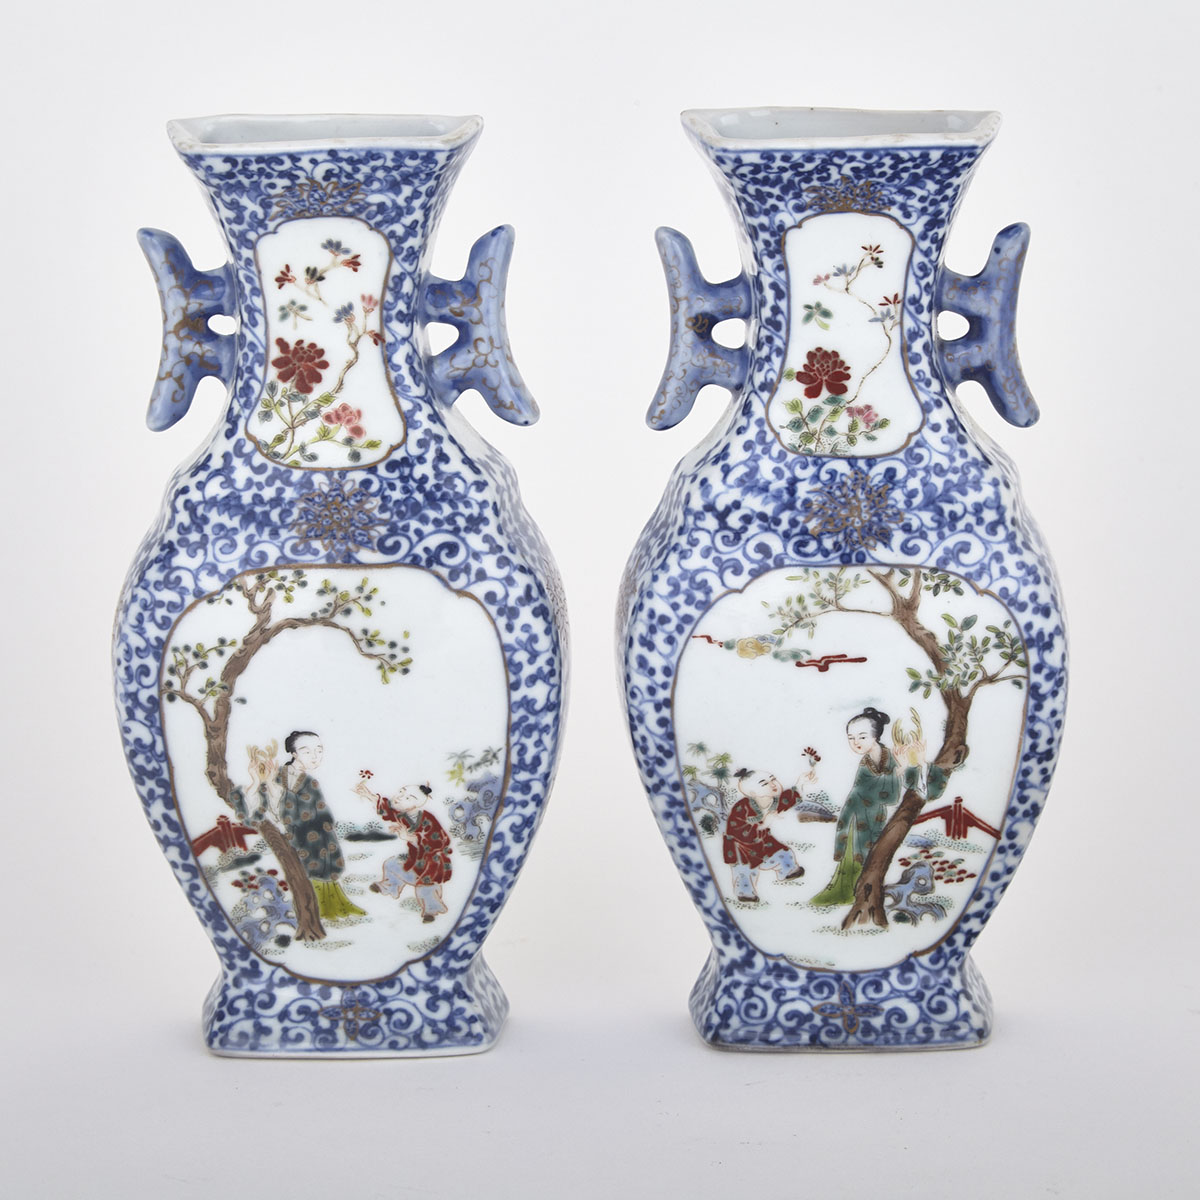 Pair of Famille Rose Wall Vases, Early 20th Century